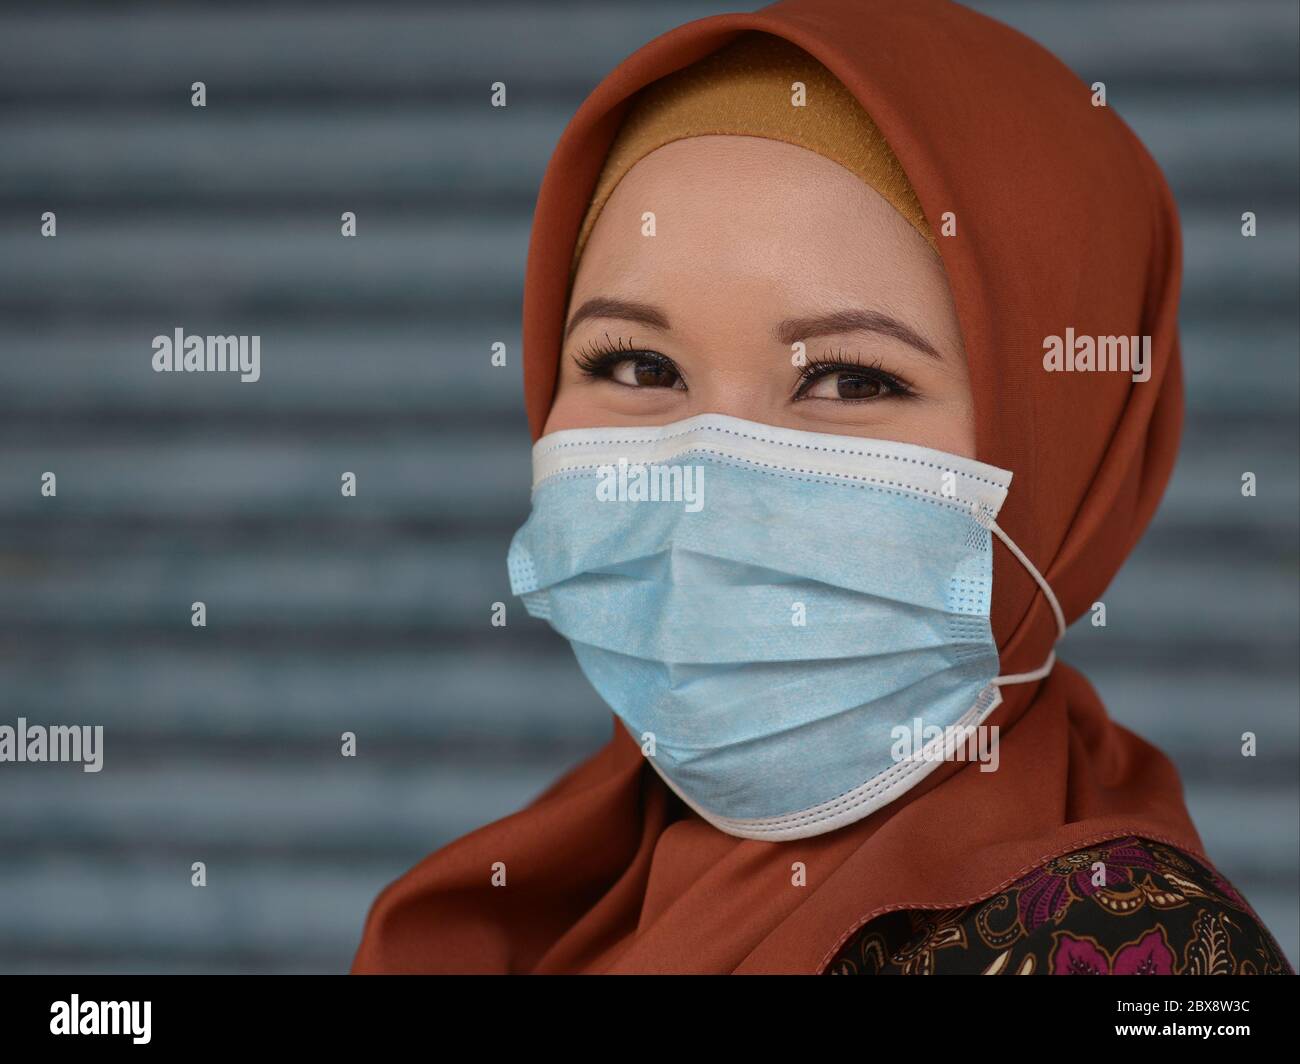 Young Malaysian Muslimah with beautiful eyes wears a disposable surgical face mask during the global 2019/20 corona-virus pandemic. Stock Photo